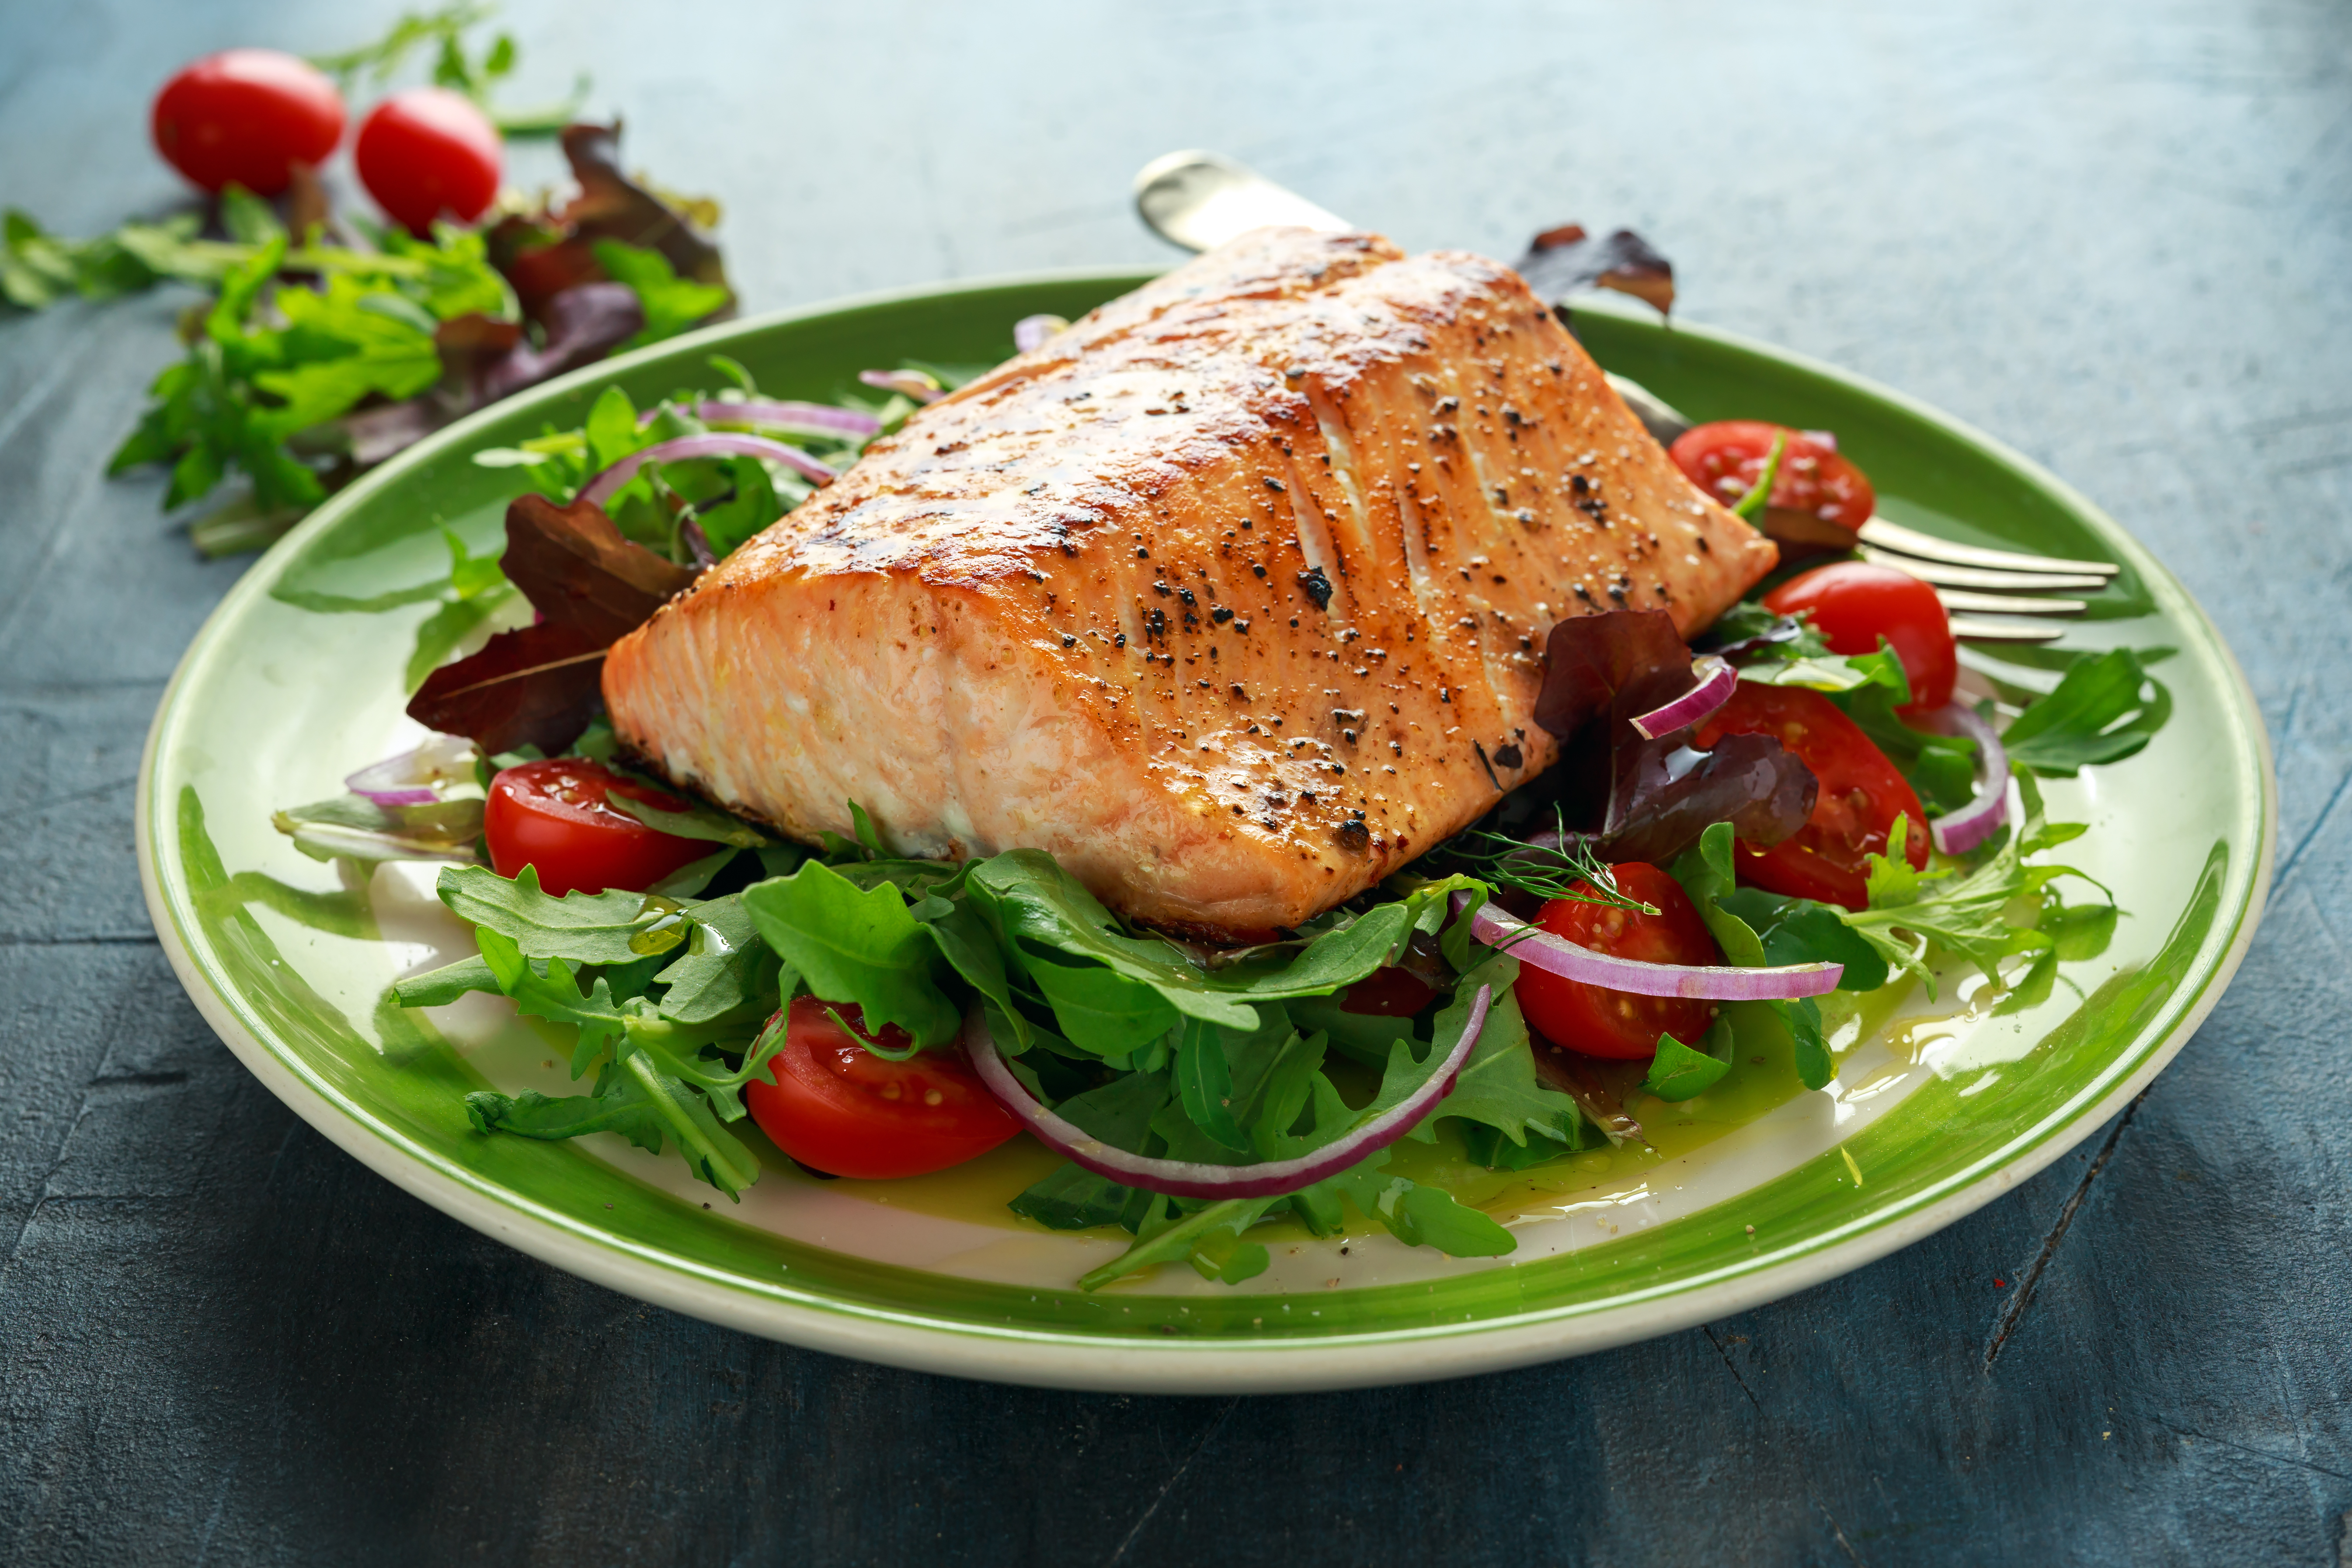 Salmon fillet on a plate of salad